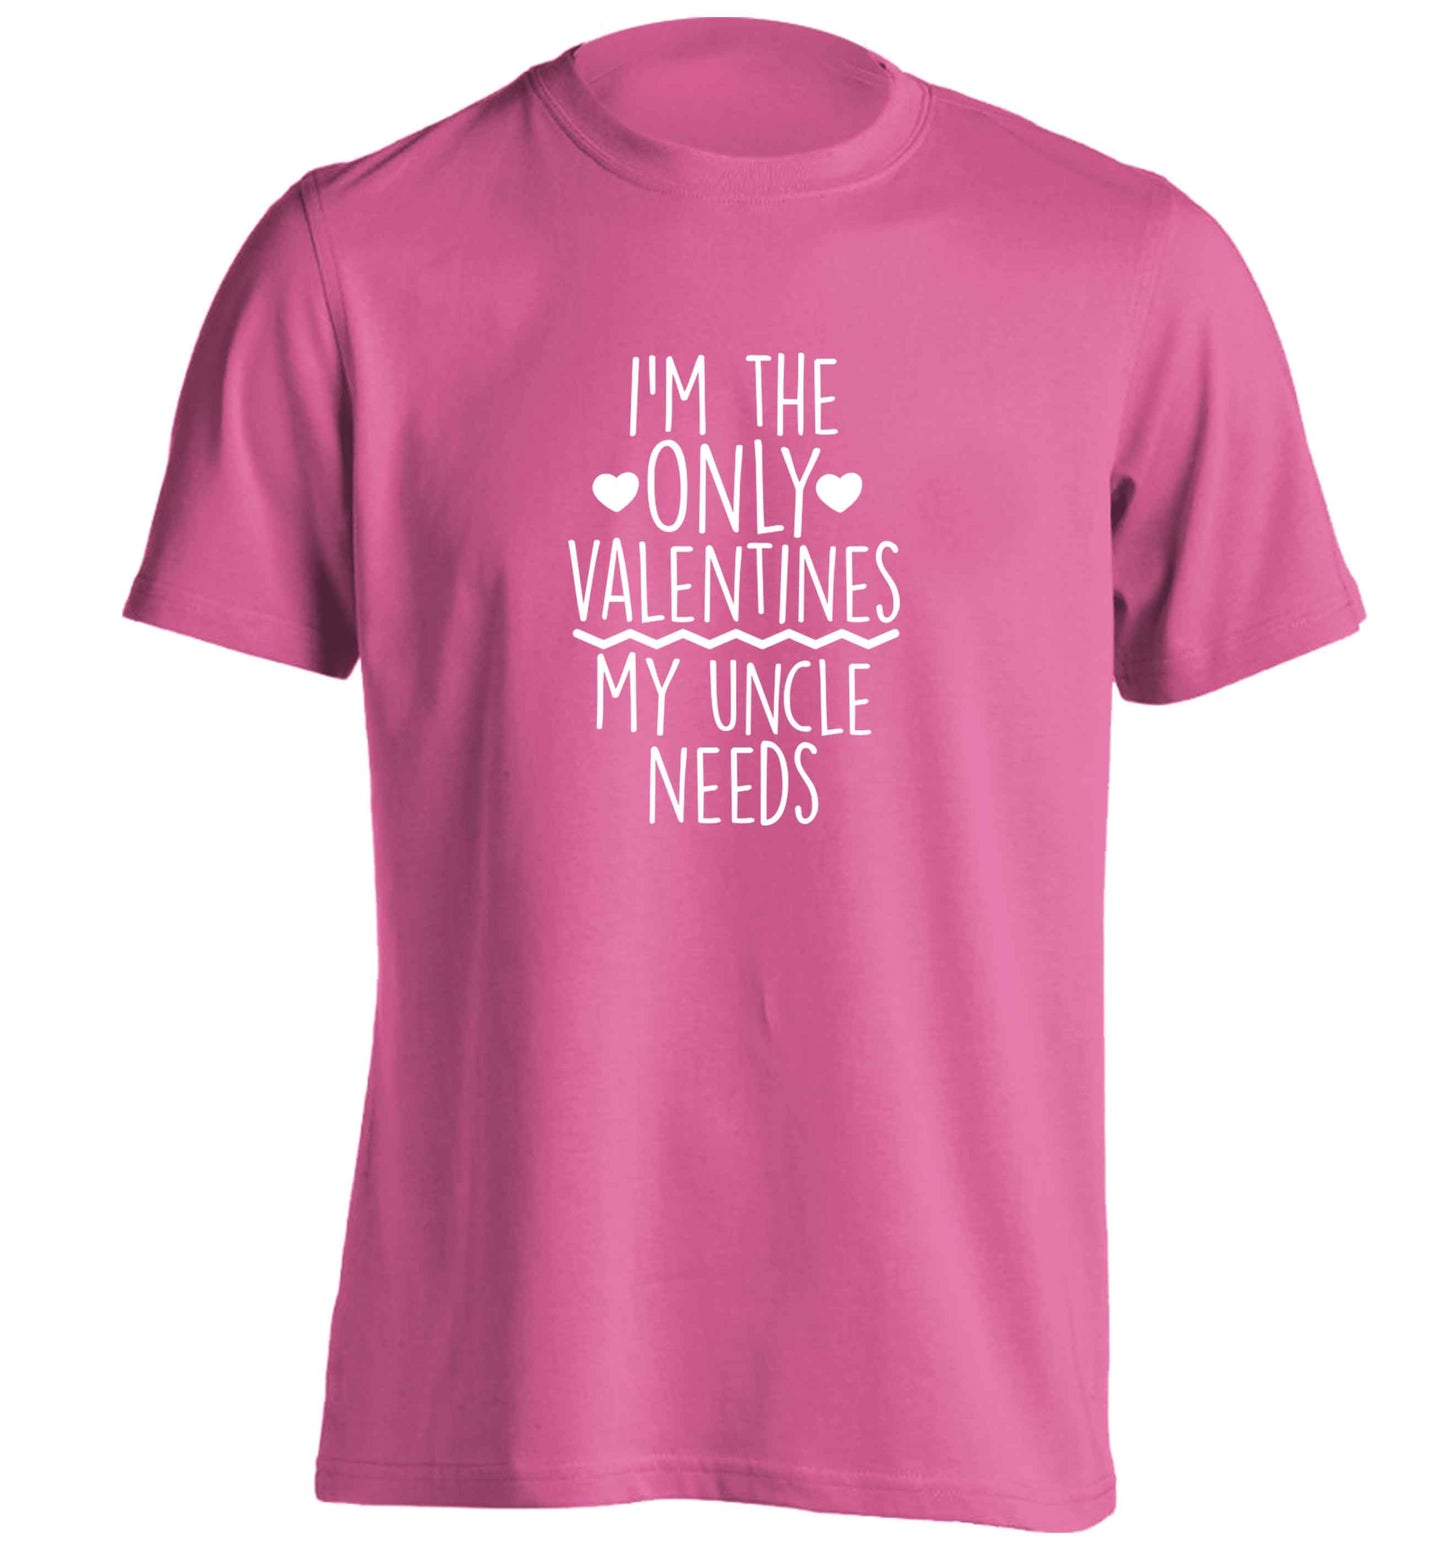 I'm the only valentines my uncle needs adults unisex pink Tshirt 2XL